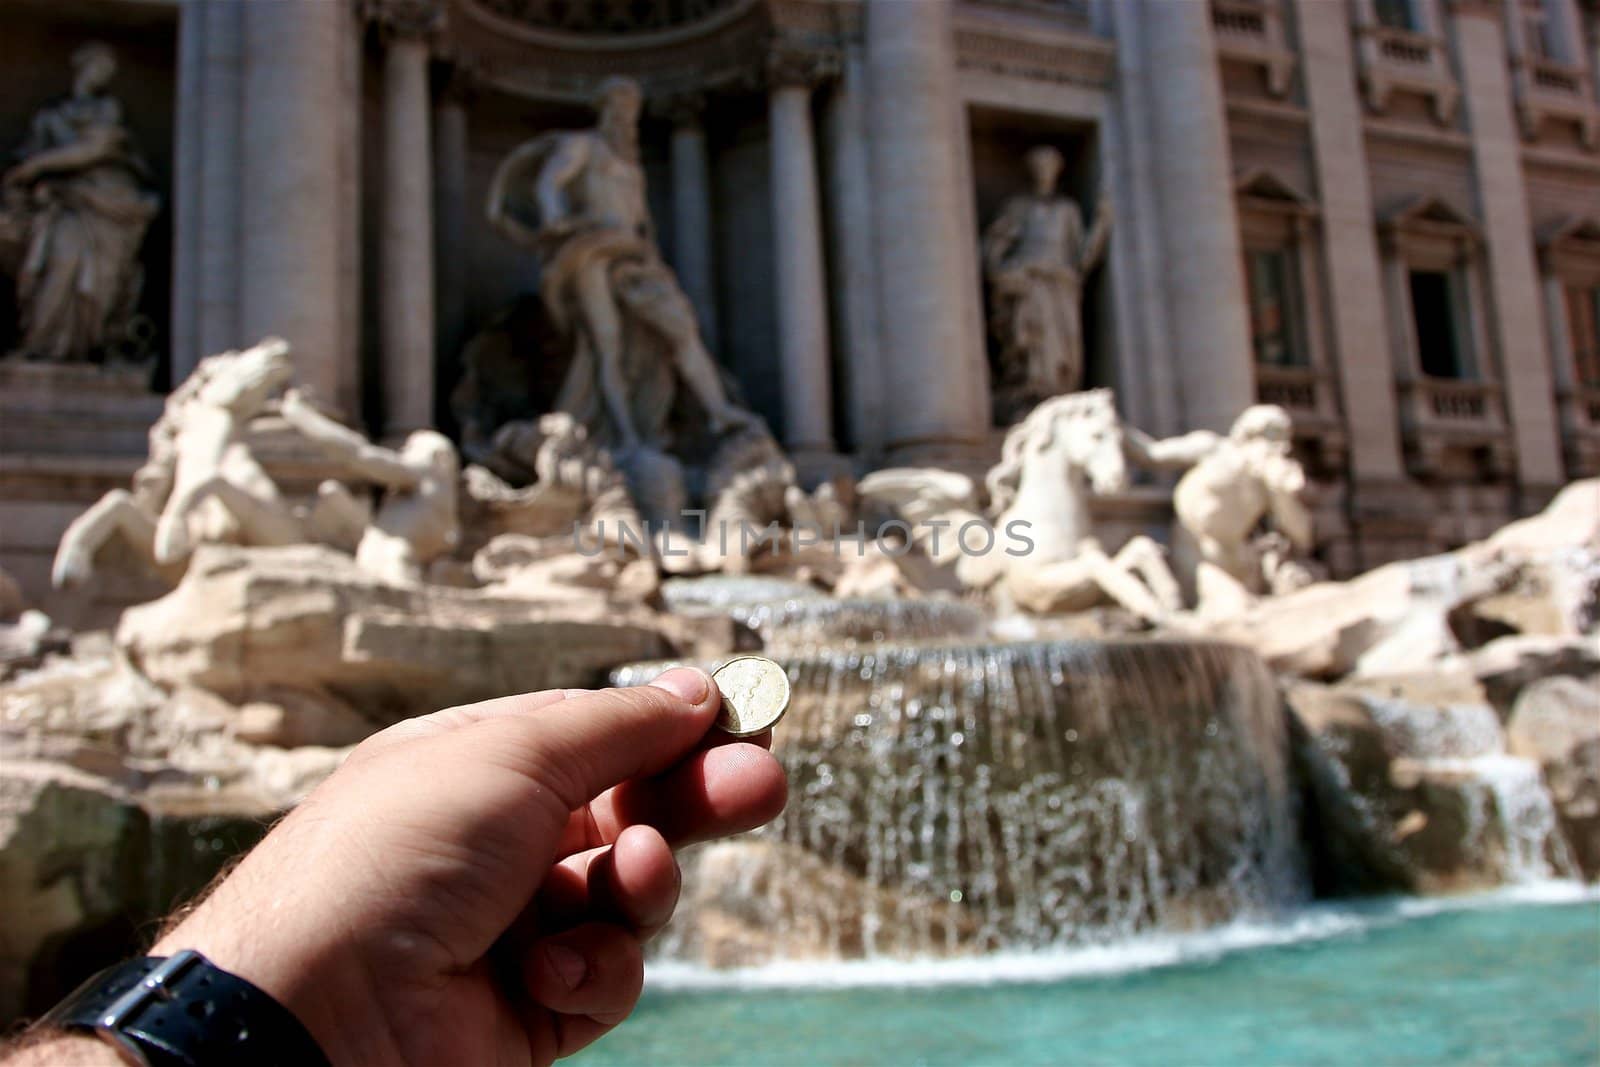 Trevi Fountain is the largest Baroque fountain in the city and one of the most famous fountains in the world.